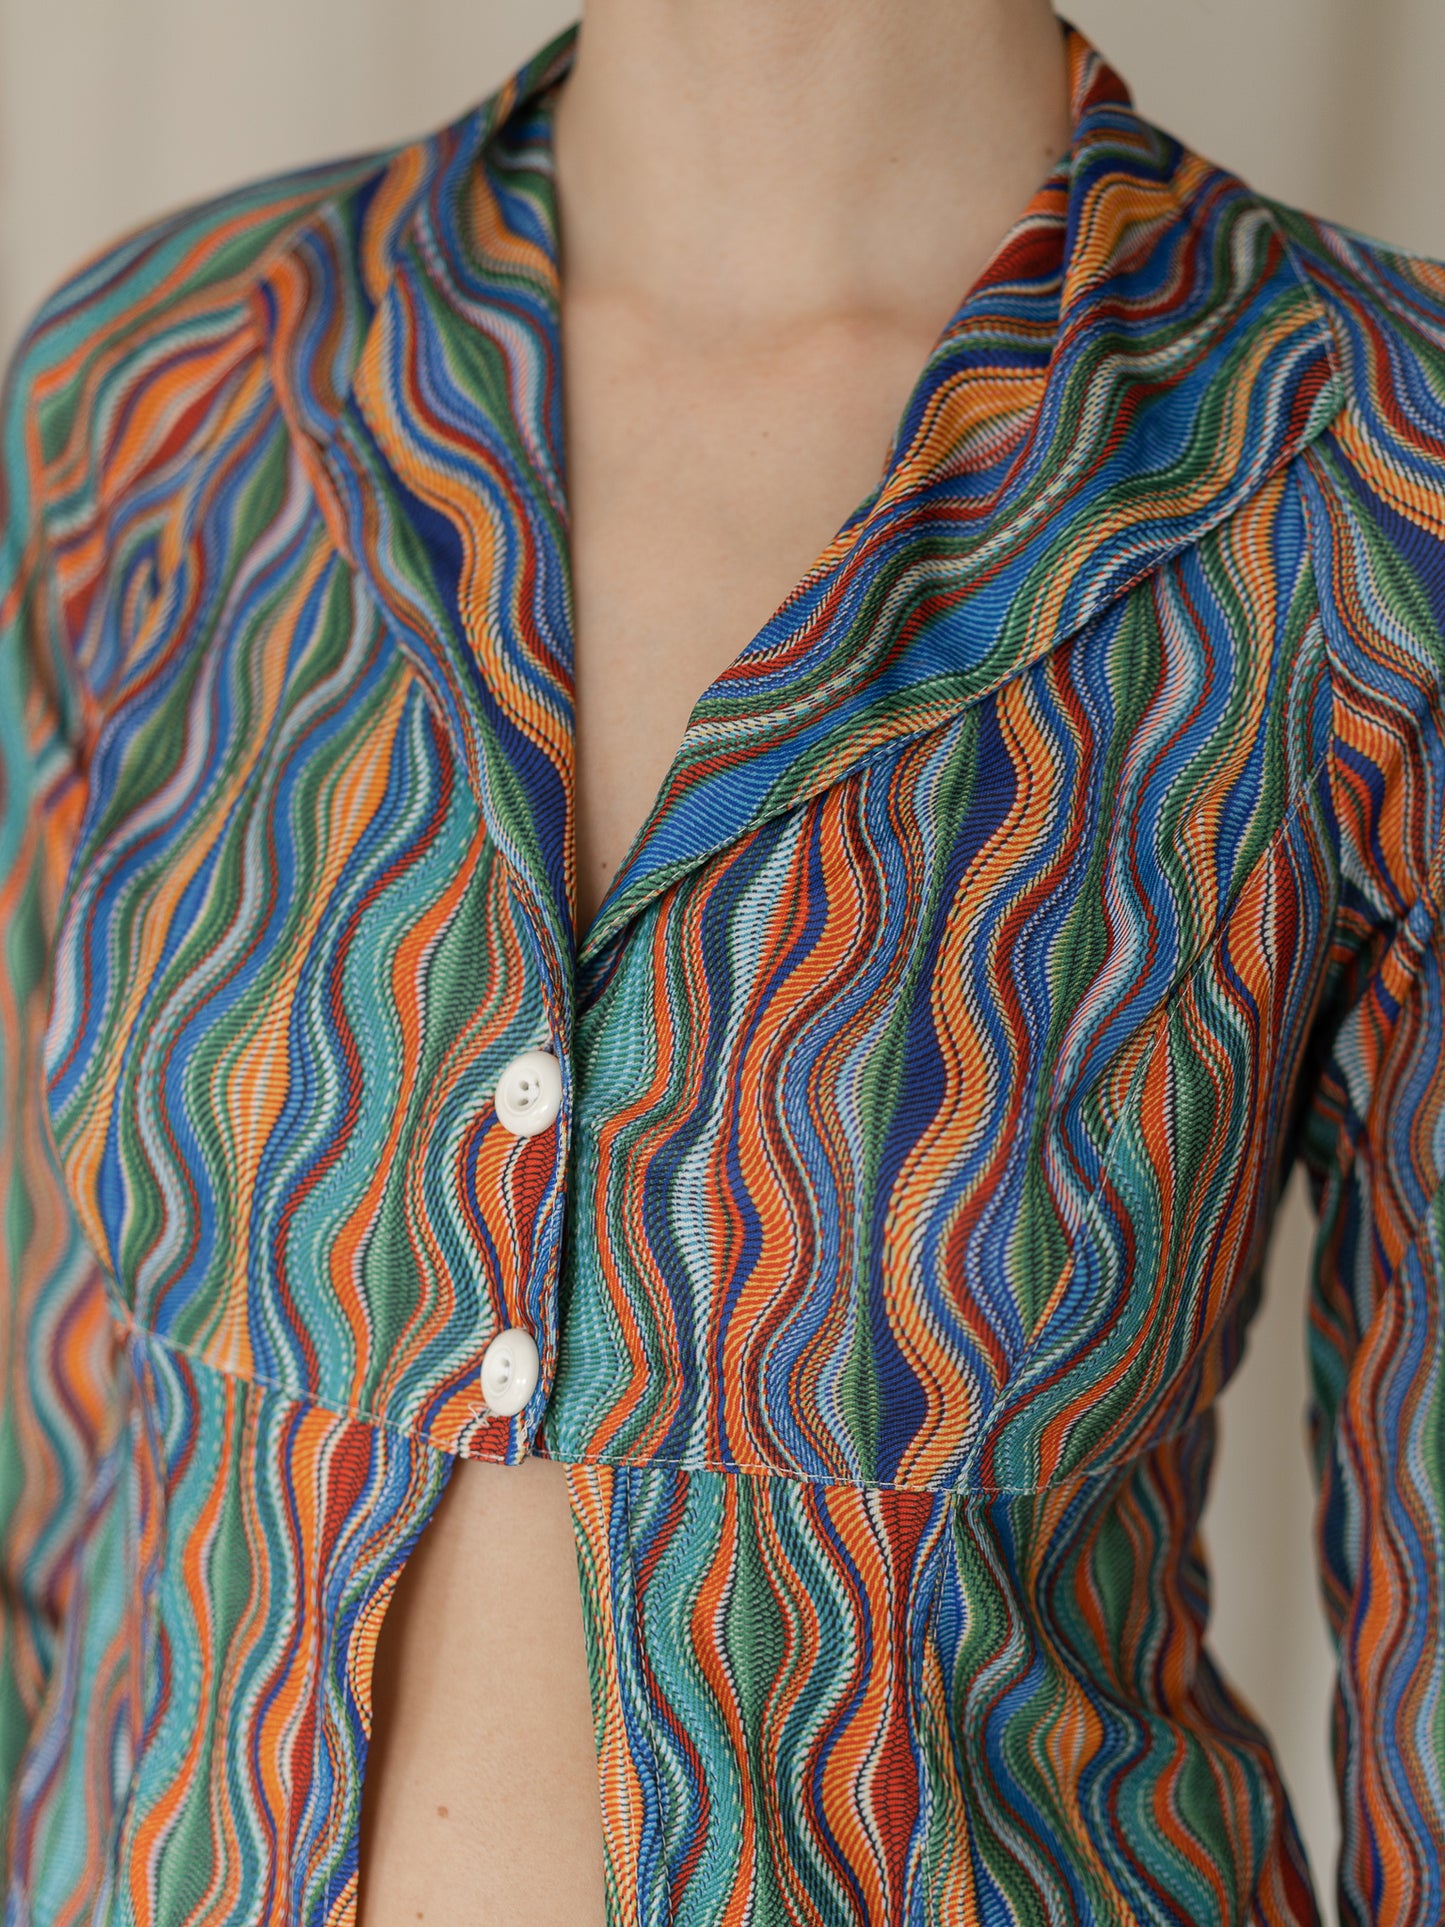 Vintage 90's "New Wave" Colorful Stretchy Top (S)